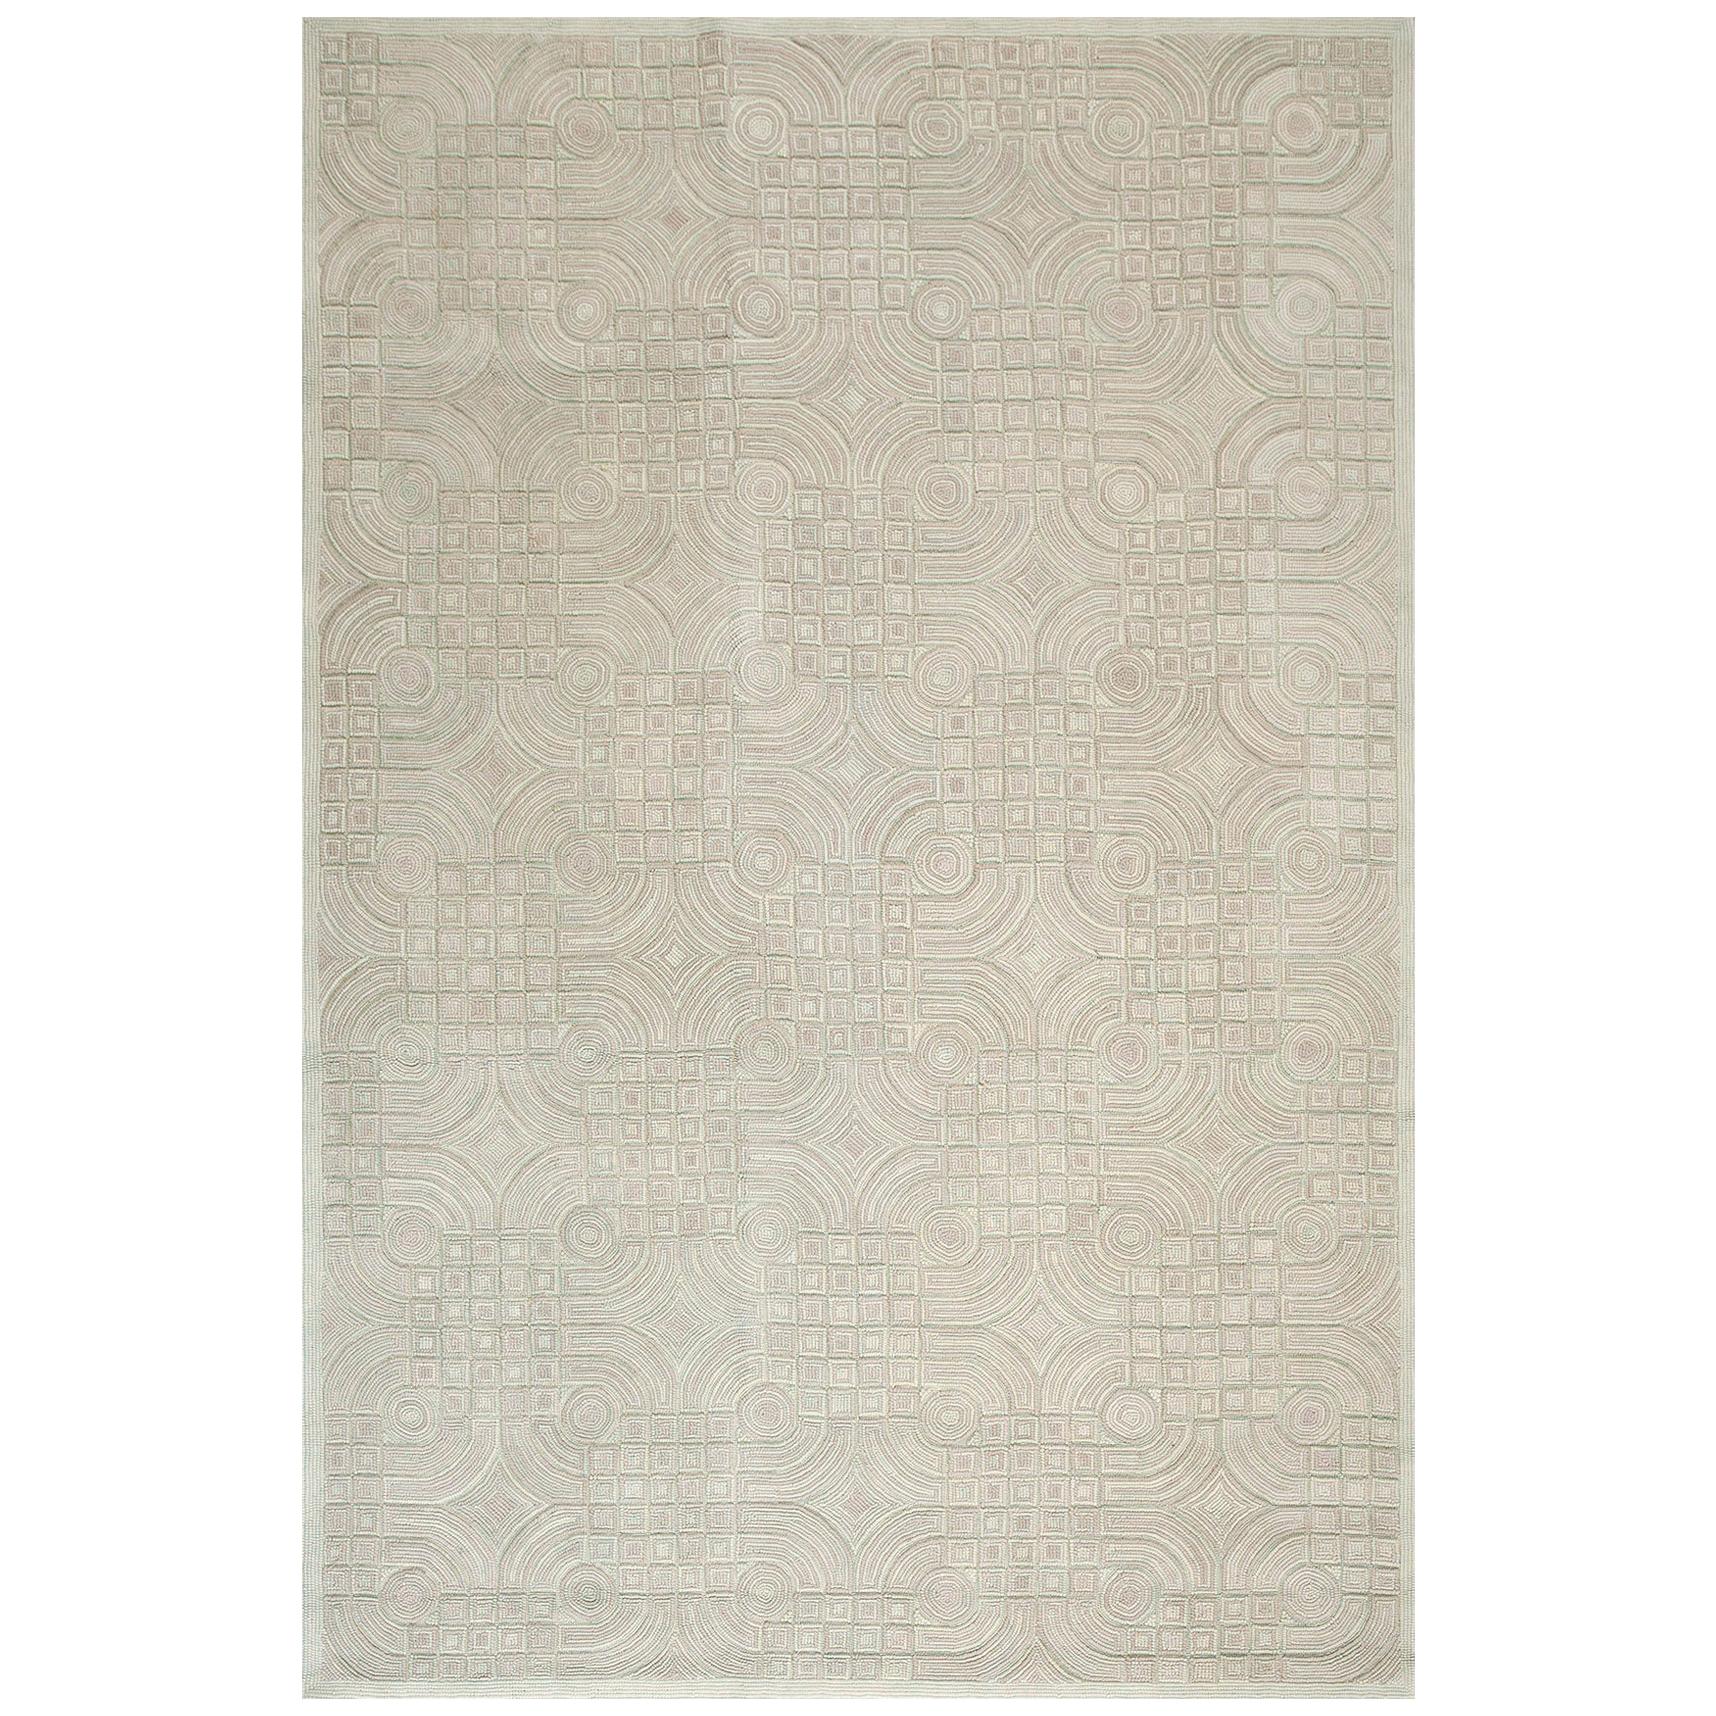 Contemporary American Hooked Rug (8' x 10' - 244 x 305 ) For Sale